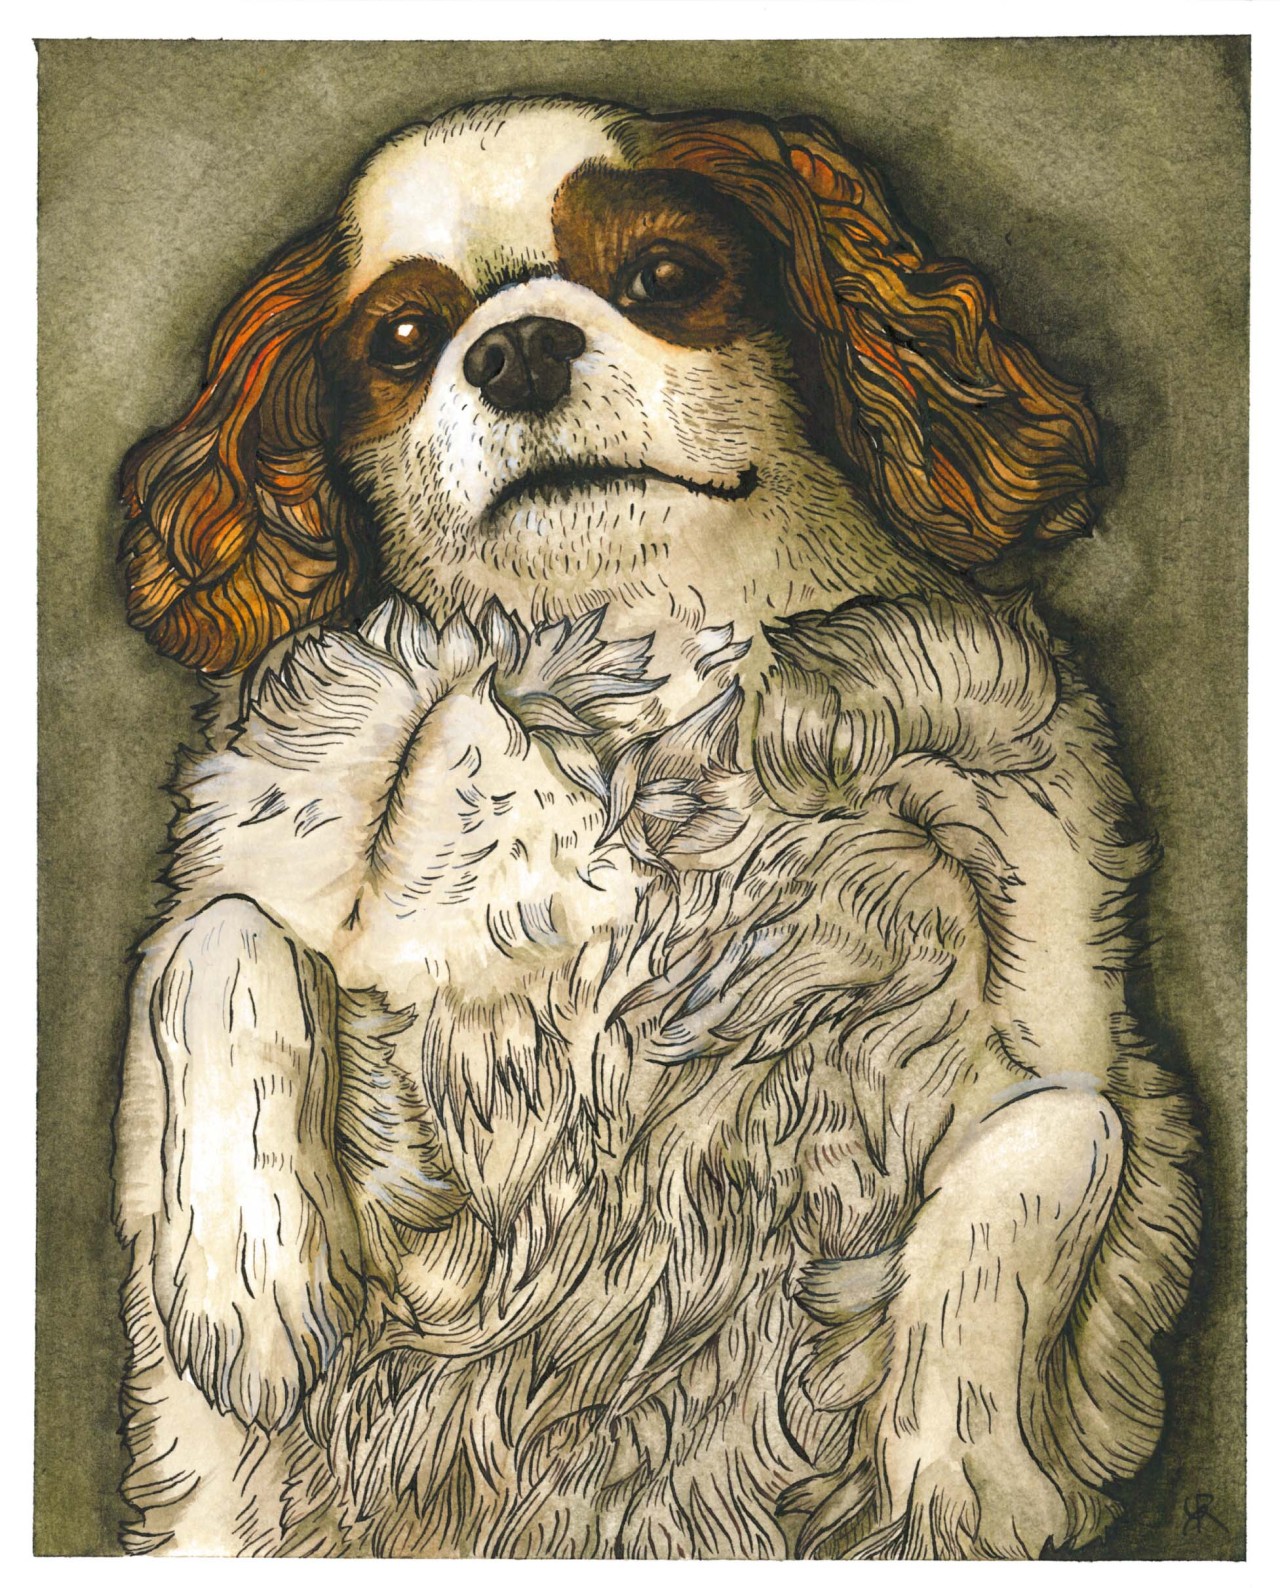 This is a portrait of my dog who passed away this June. RIP Fergie-dog More of my art at univers47.tumblr.com